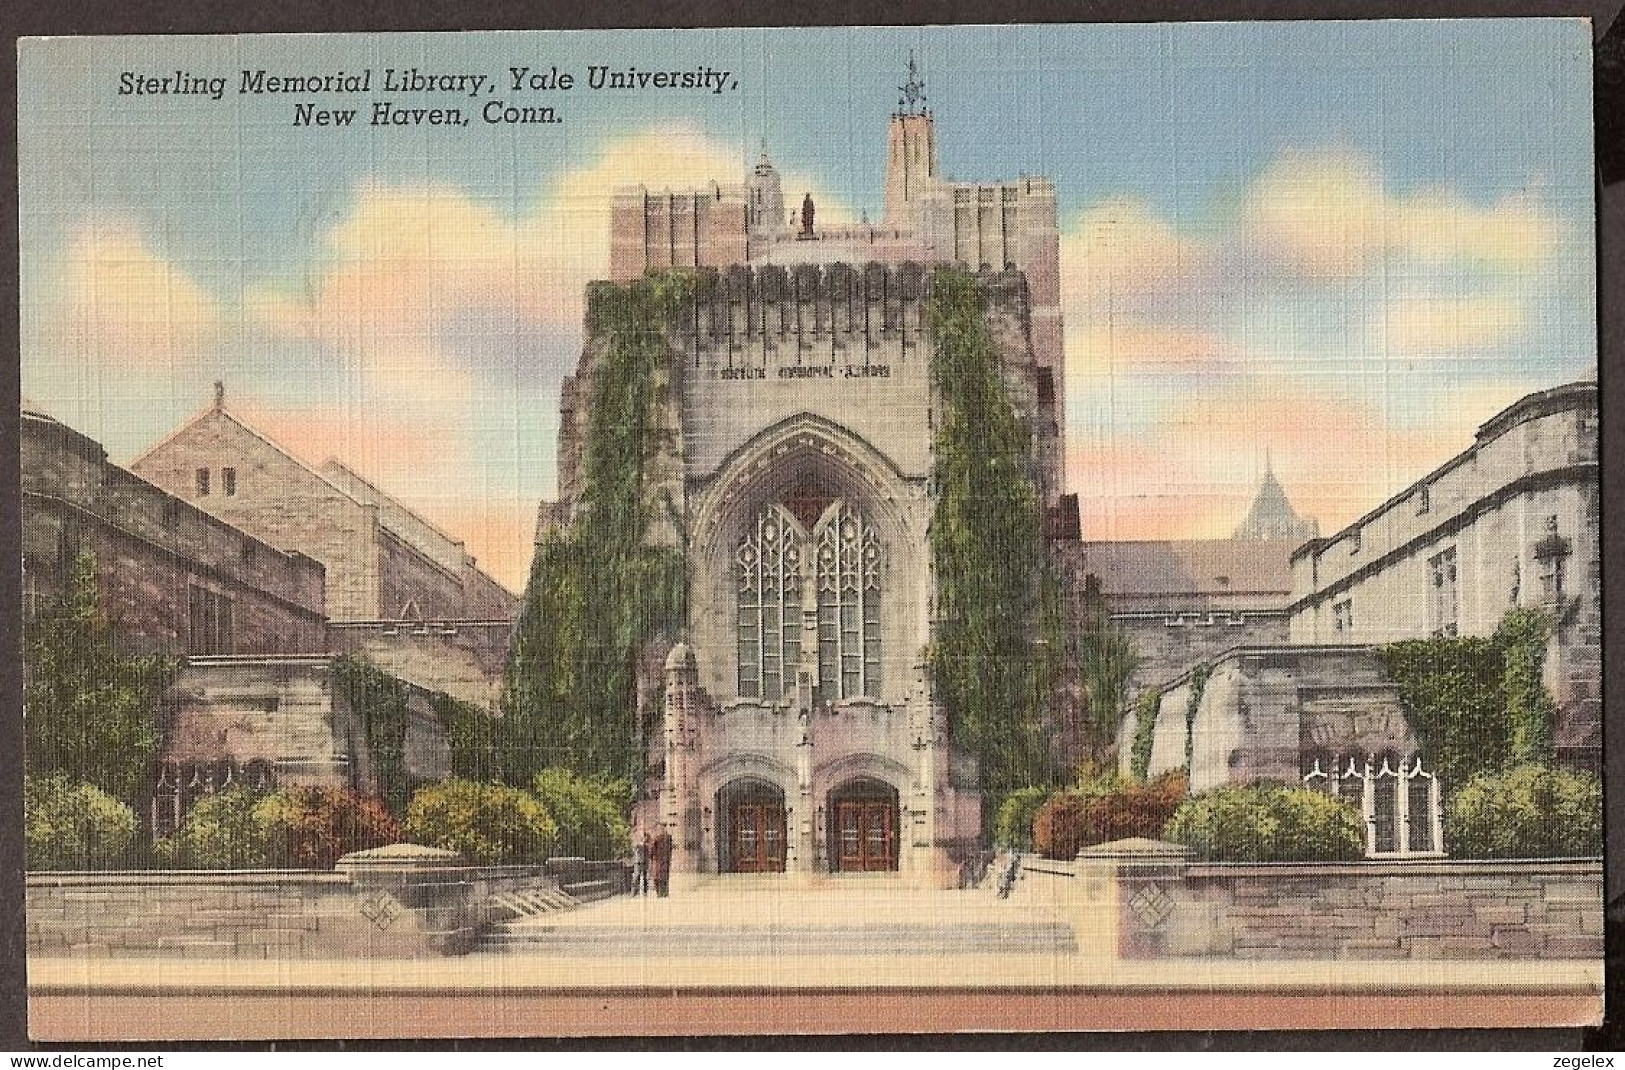 New Haven, Connecticut - Sterling Memorial Library, Yale University 1941 - New Haven